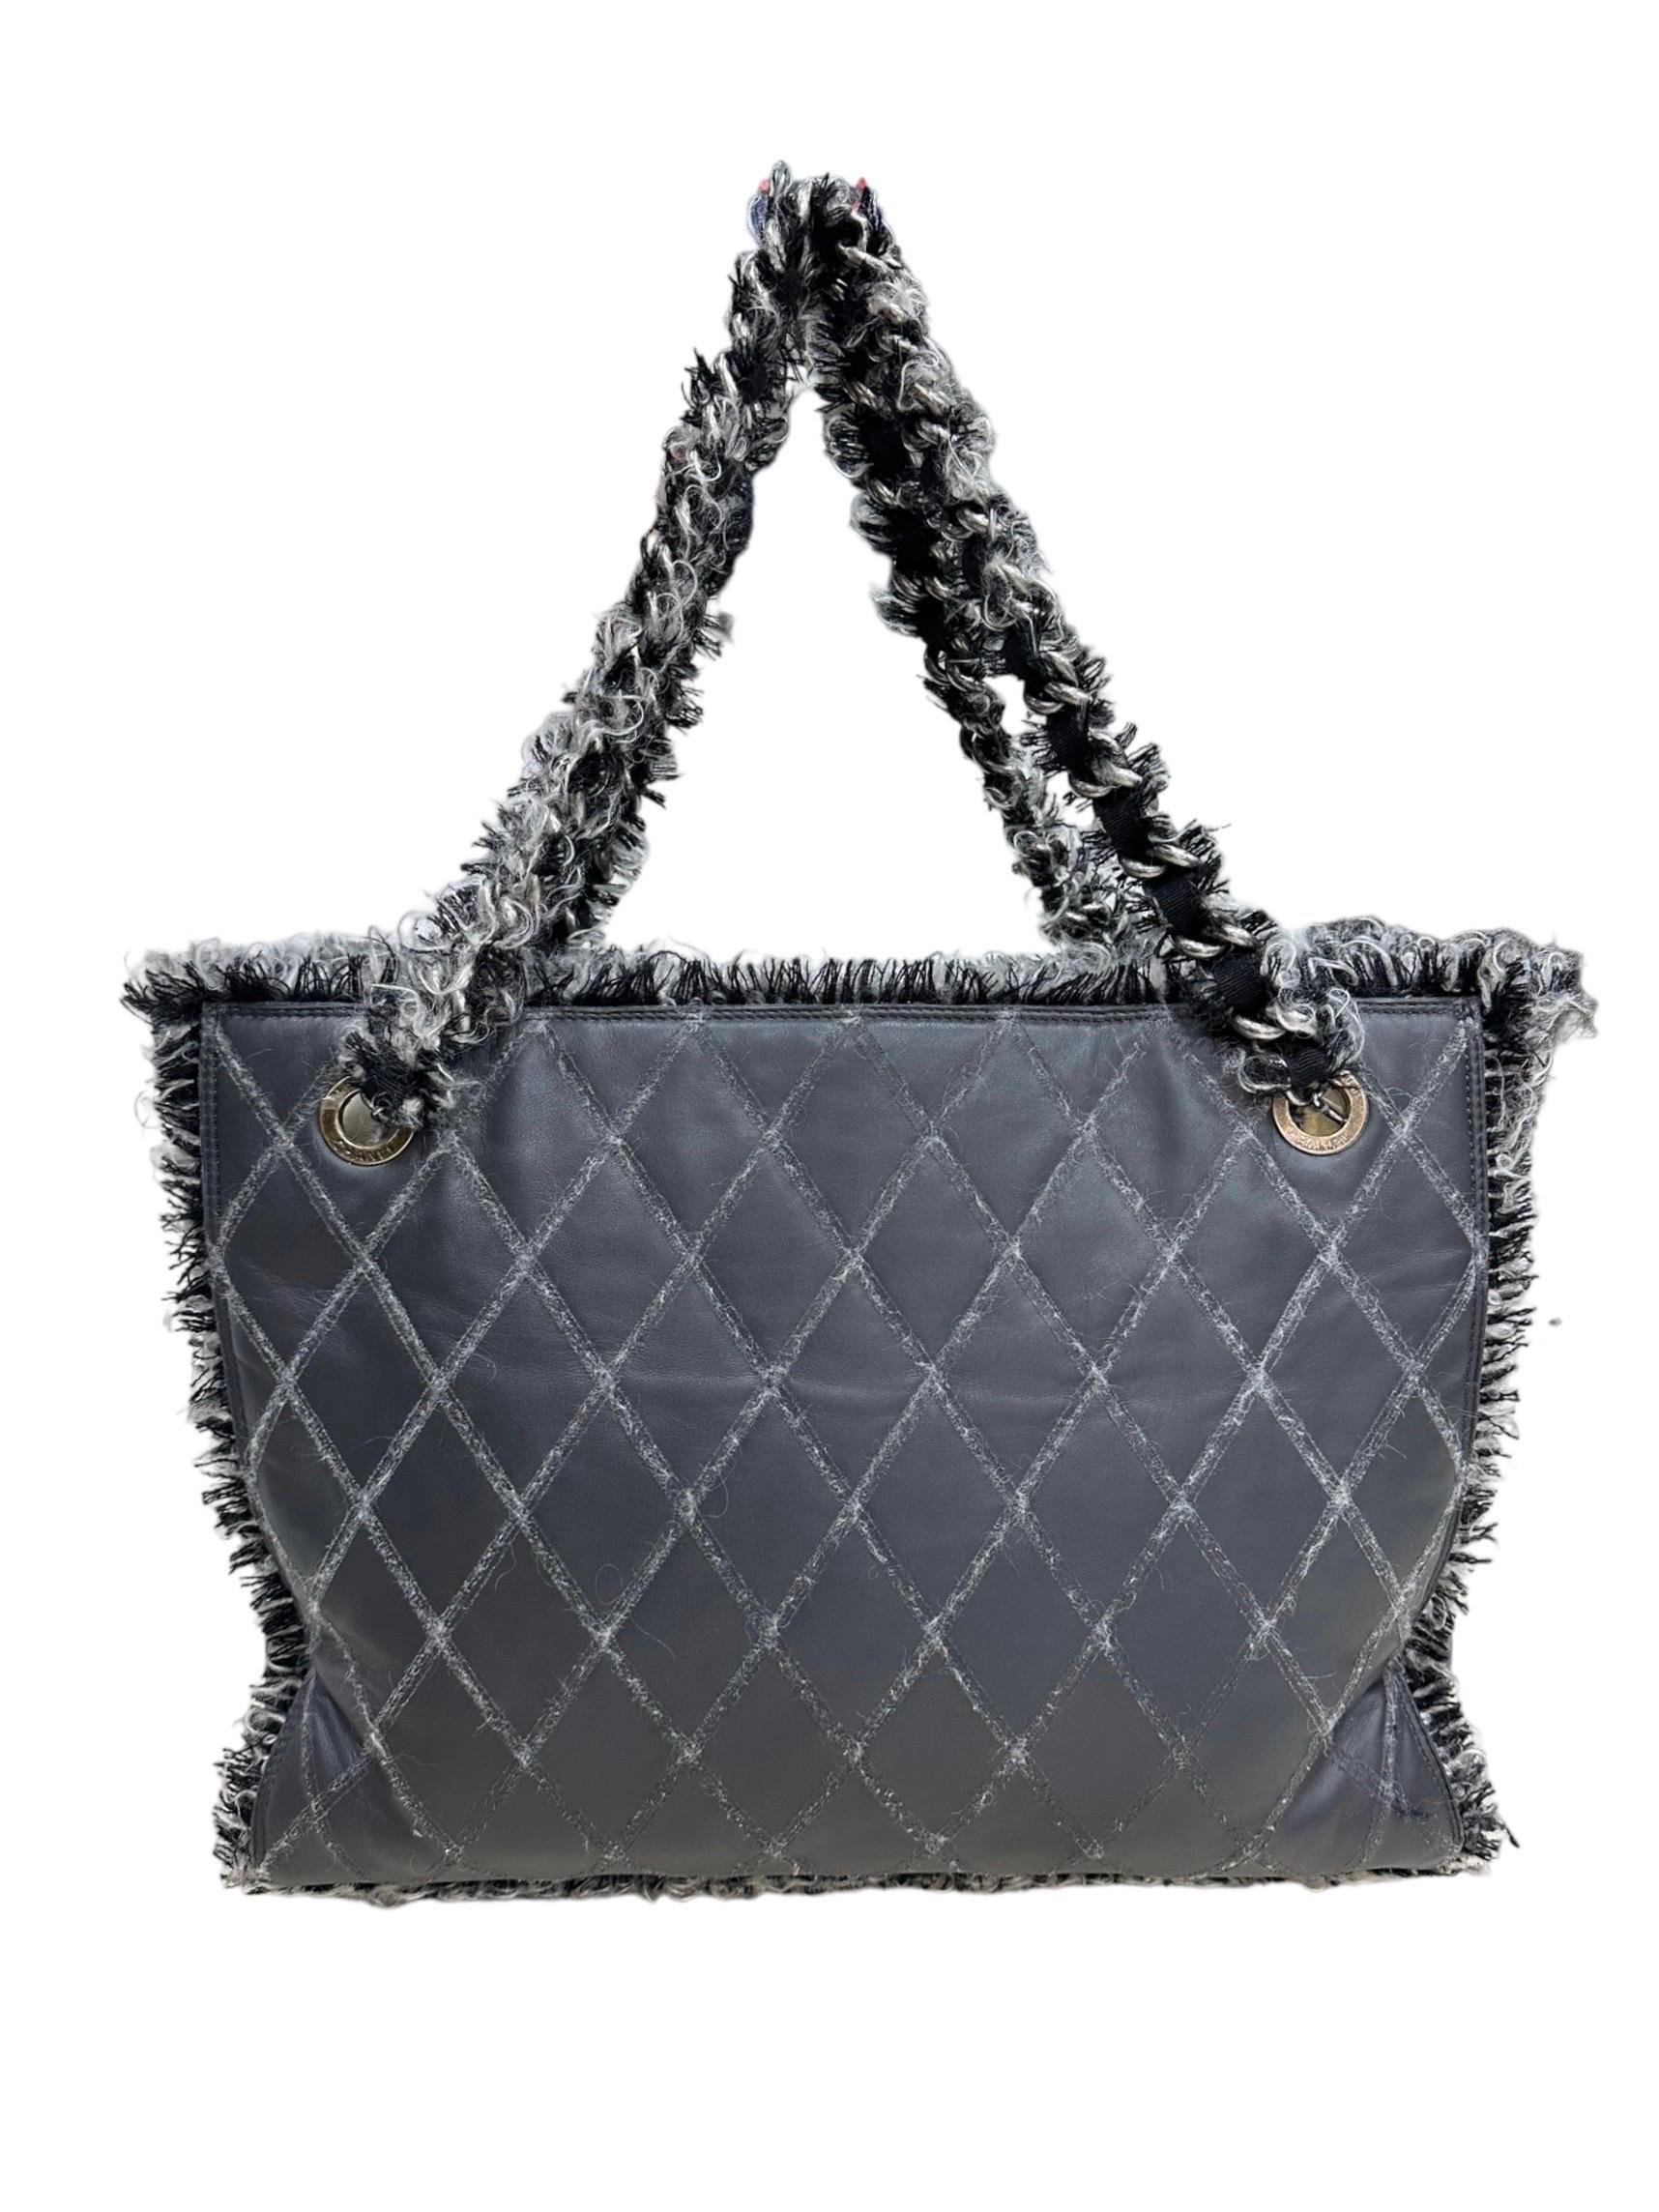 2011 Chanel Tweed Grey Tote Bag For Sale 4